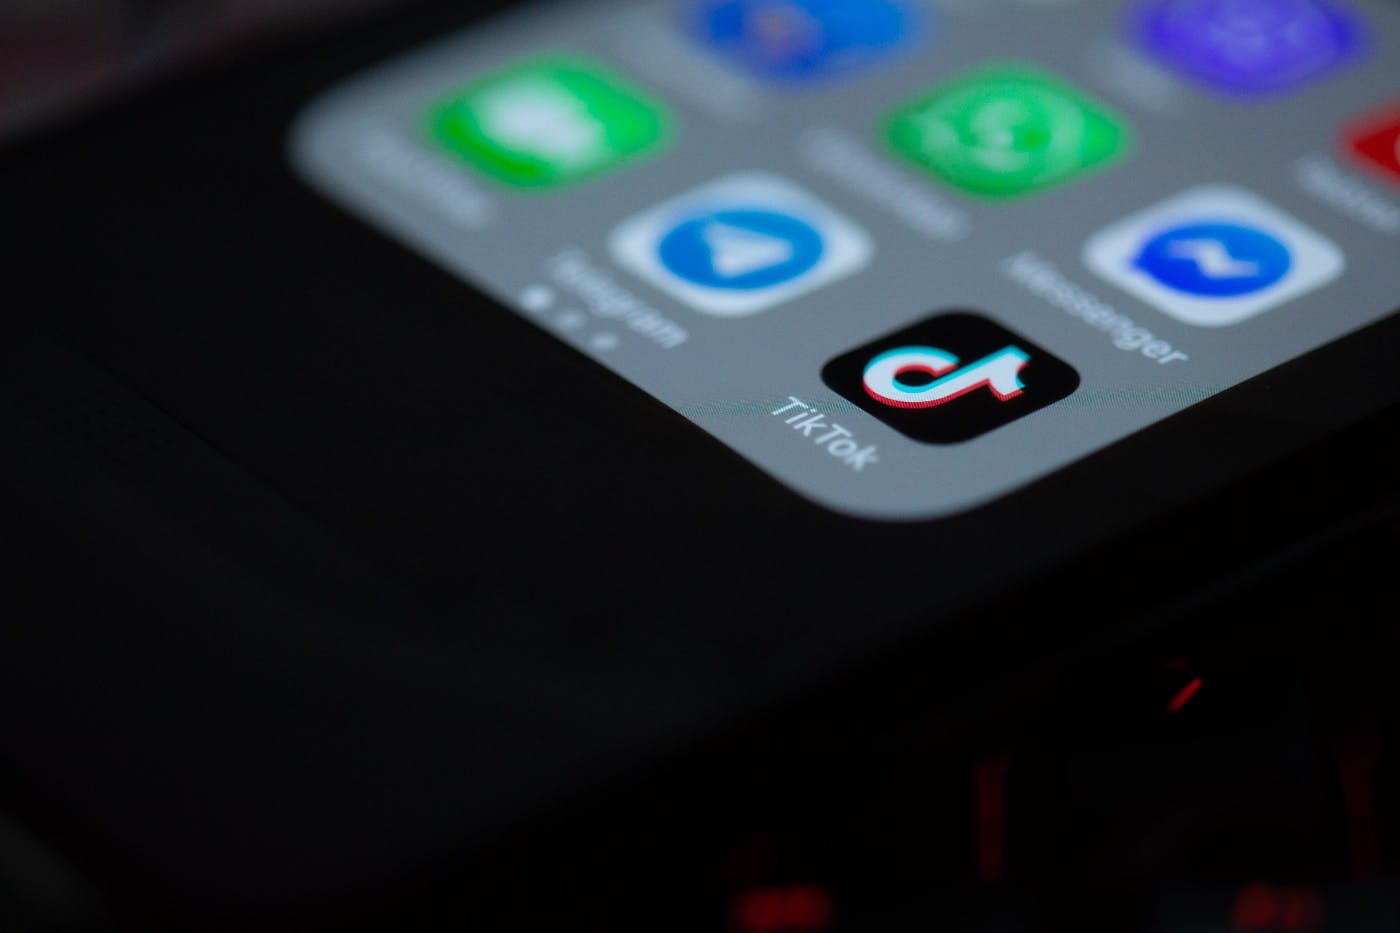 The bottom corner of a smartphone screen with a TikTok icon